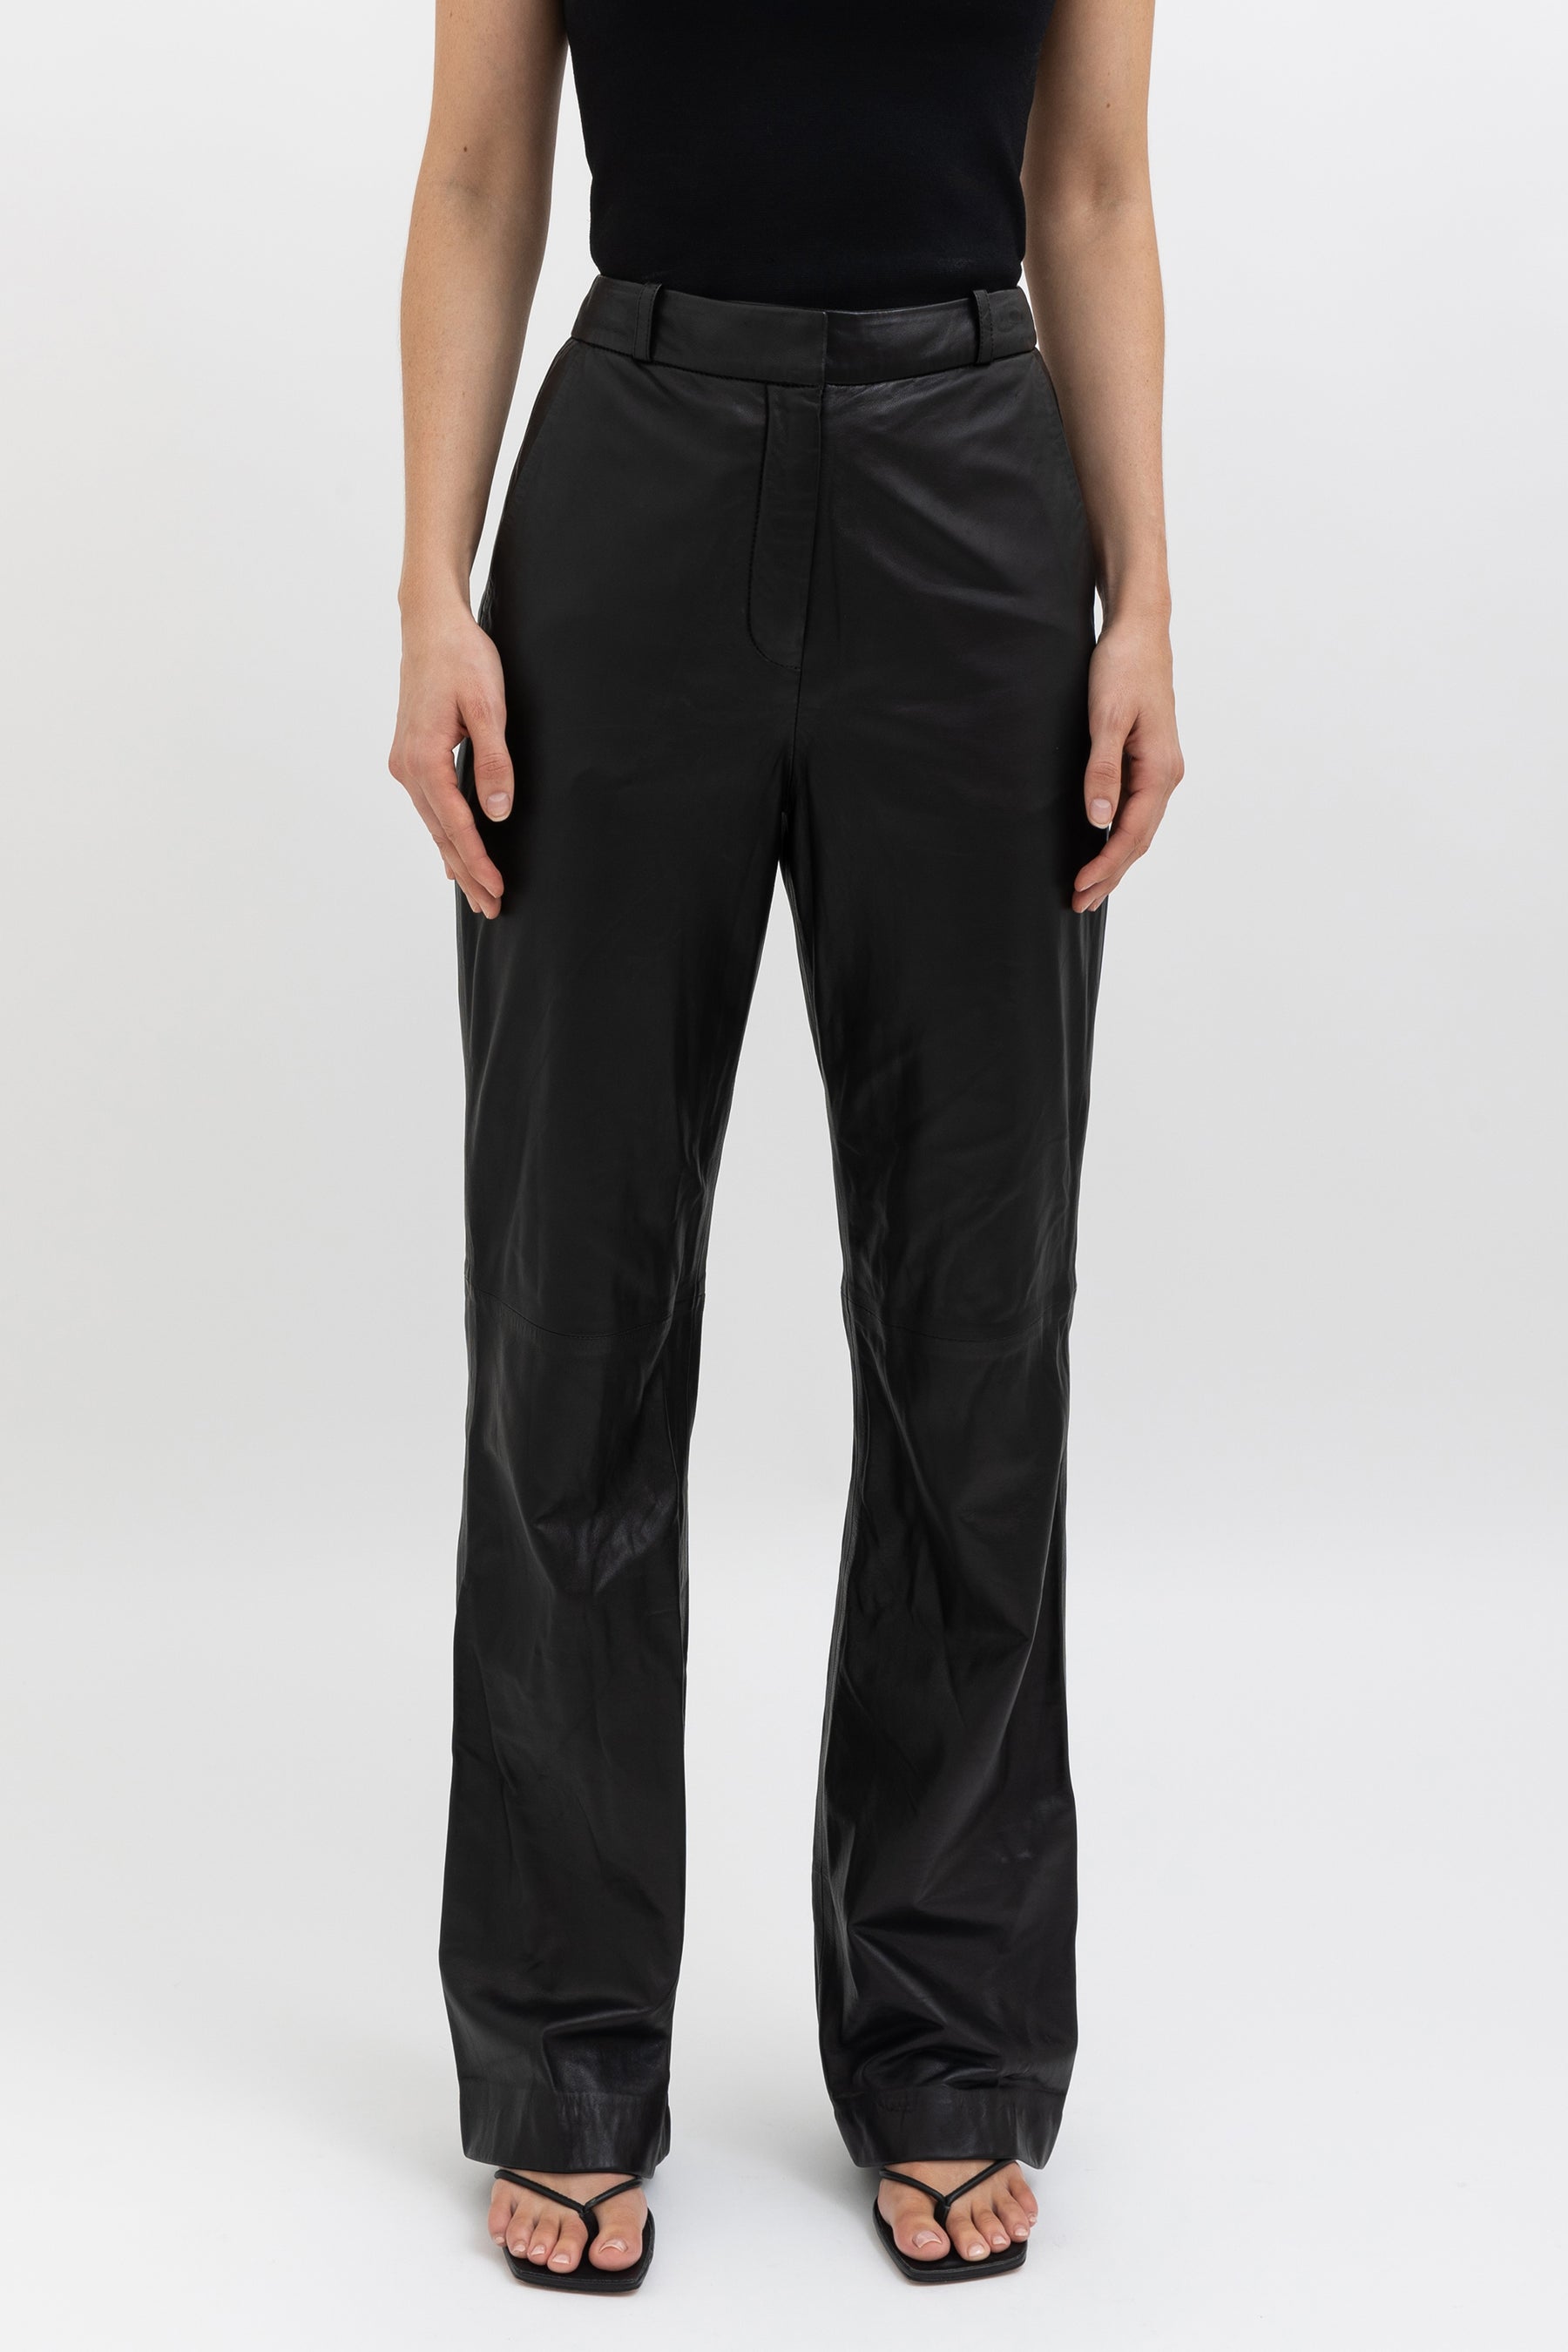 Lincoln Leather Pant